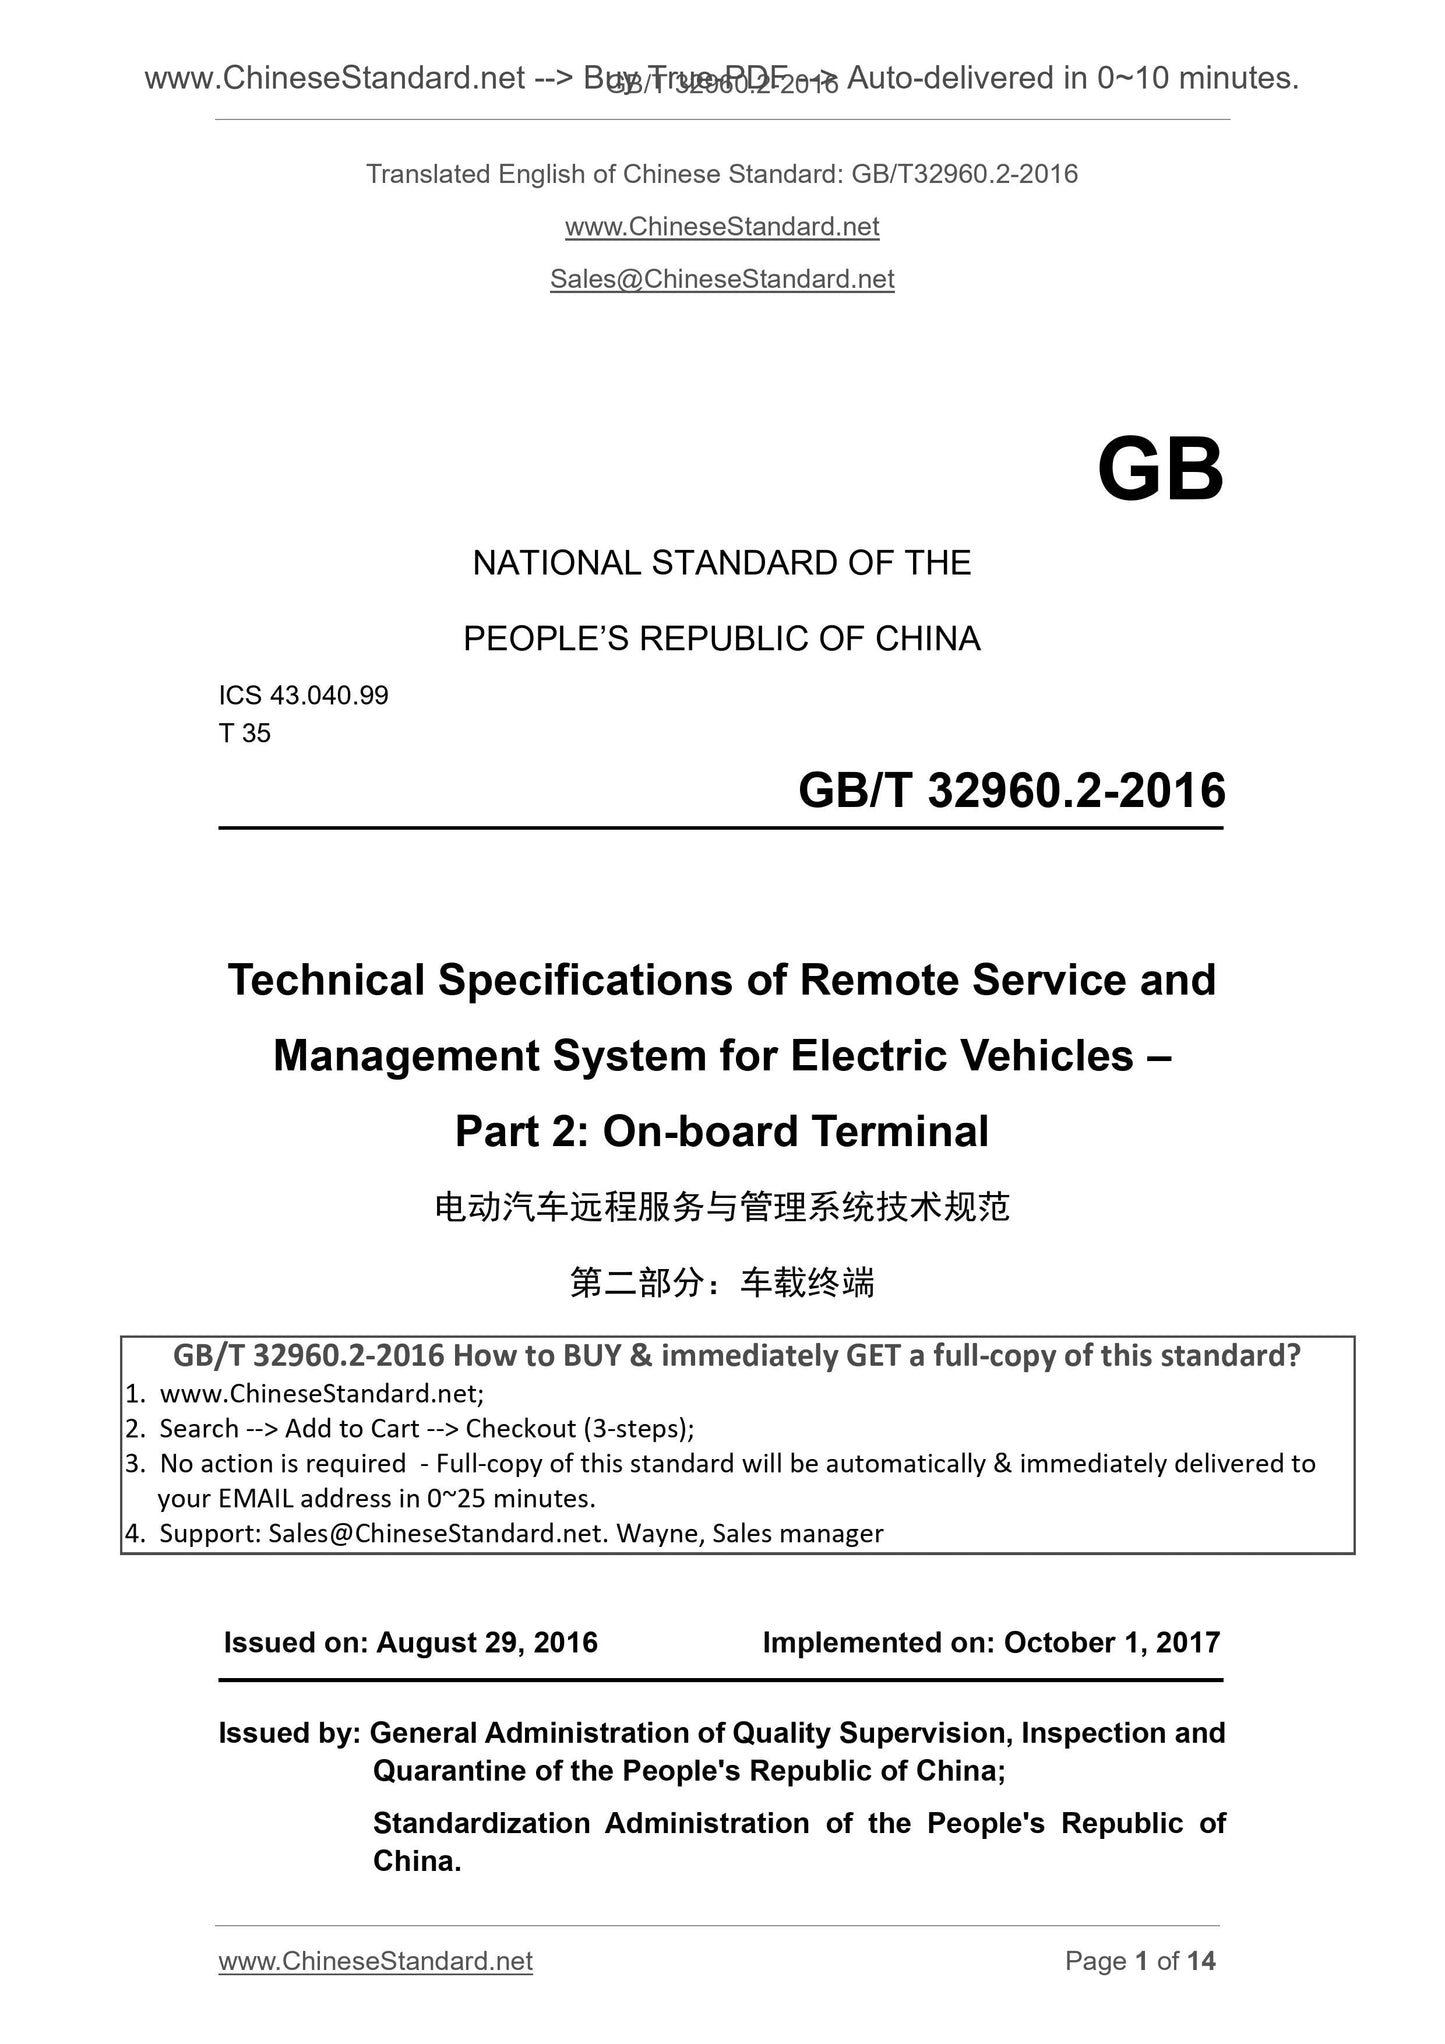 GB/T 32960.2-2016 Page 1